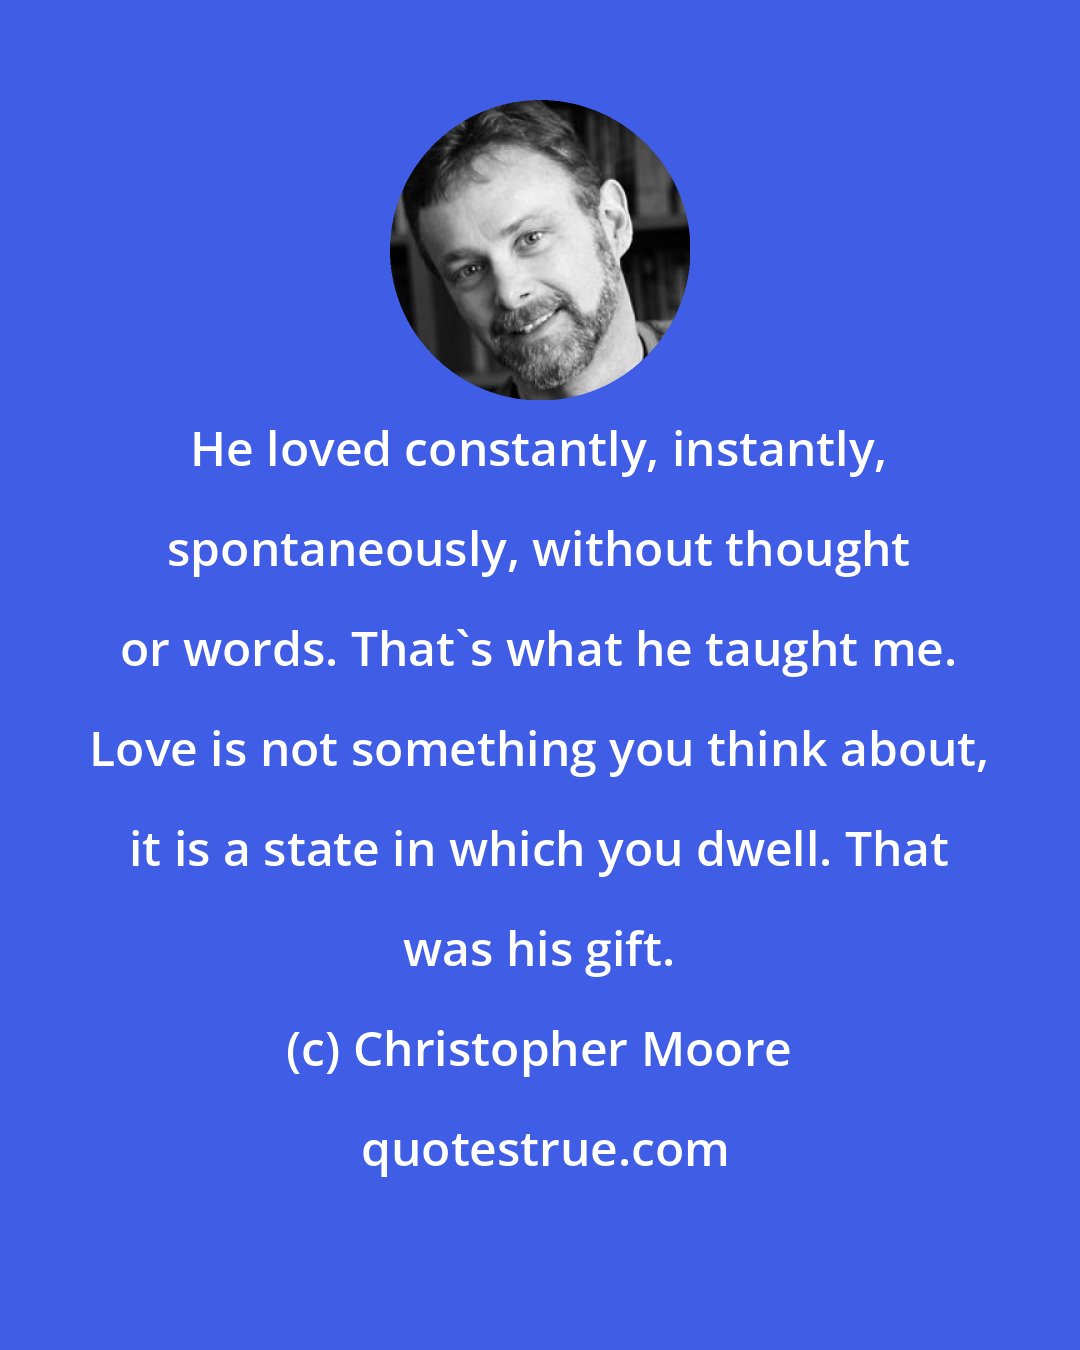 Christopher Moore: He loved constantly, instantly, spontaneously, without thought or words. That's what he taught me. Love is not something you think about, it is a state in which you dwell. That was his gift.